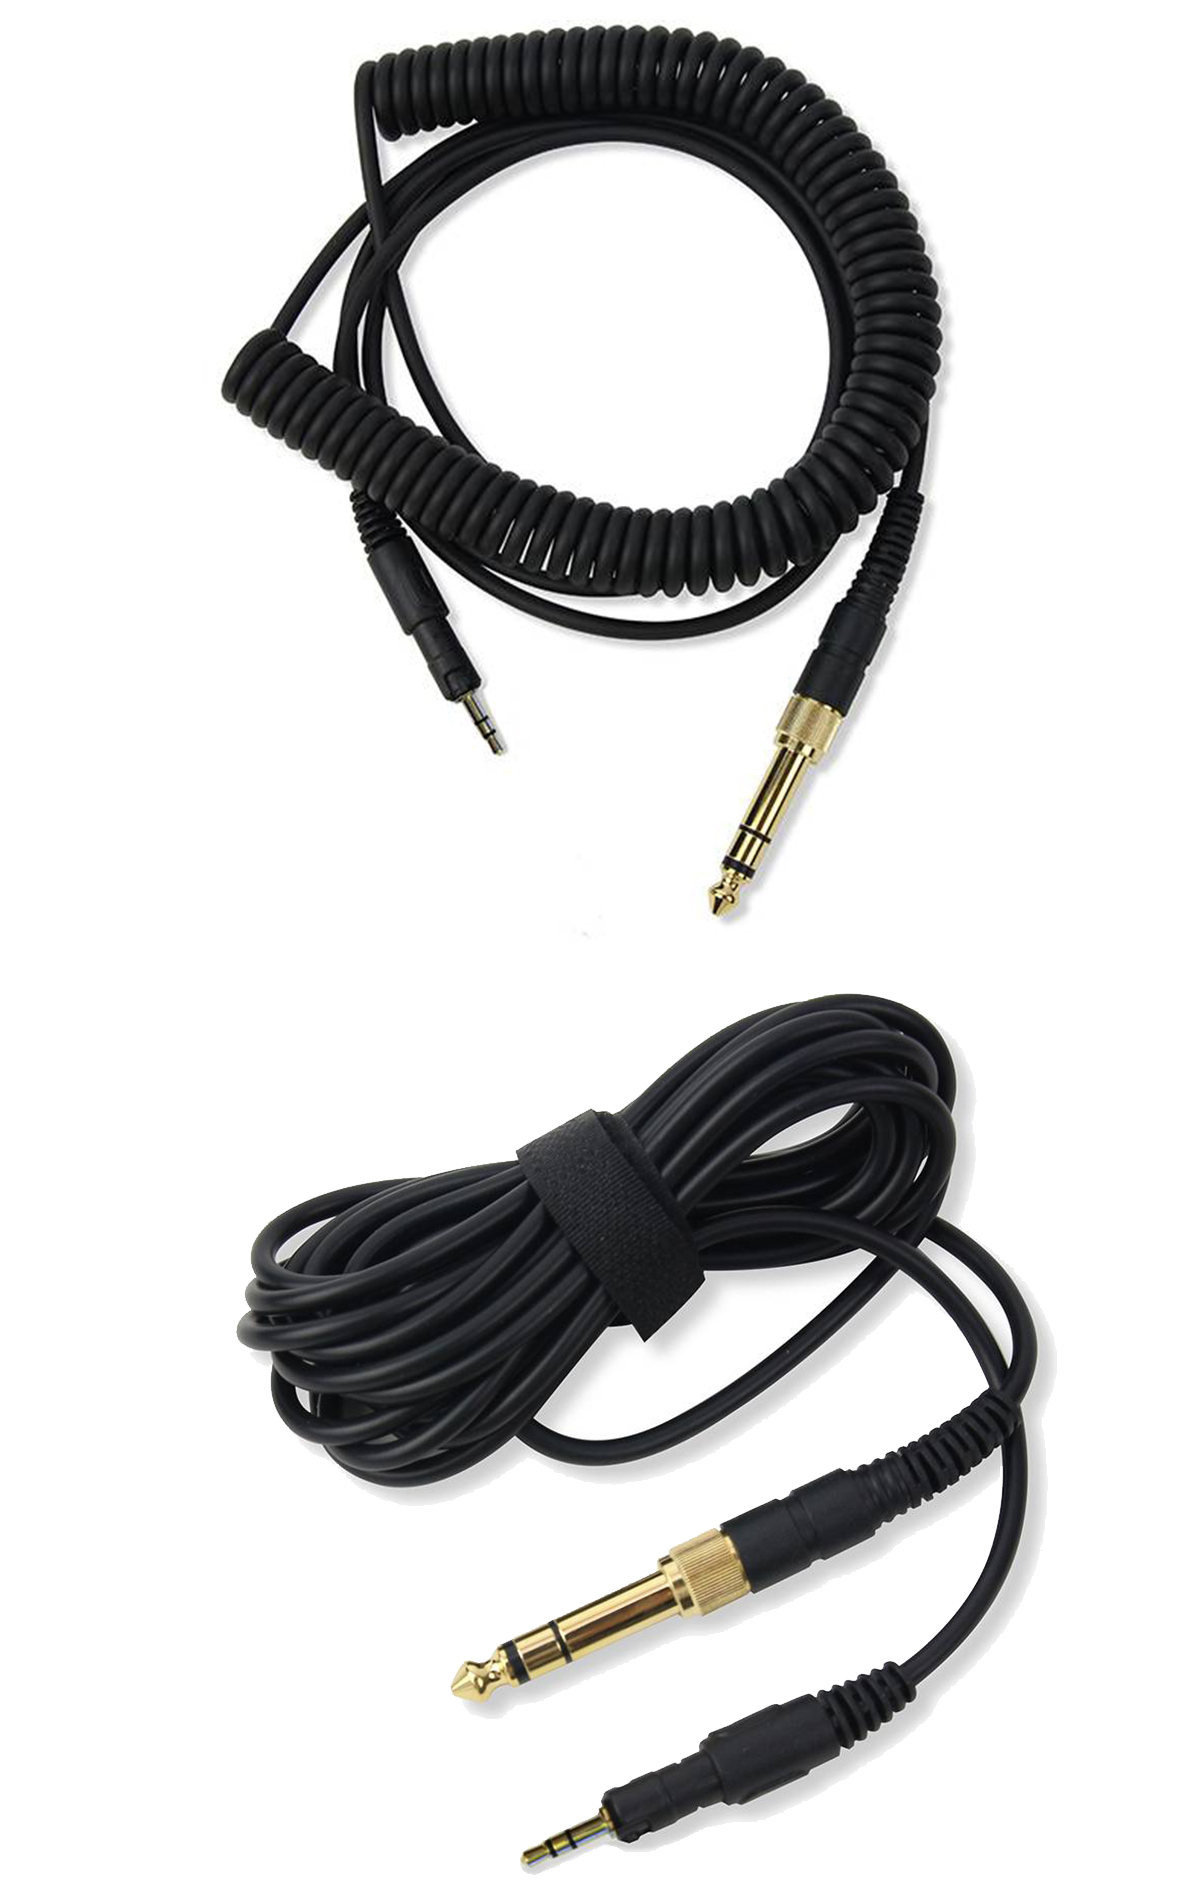 Removable Multi-connection Cables